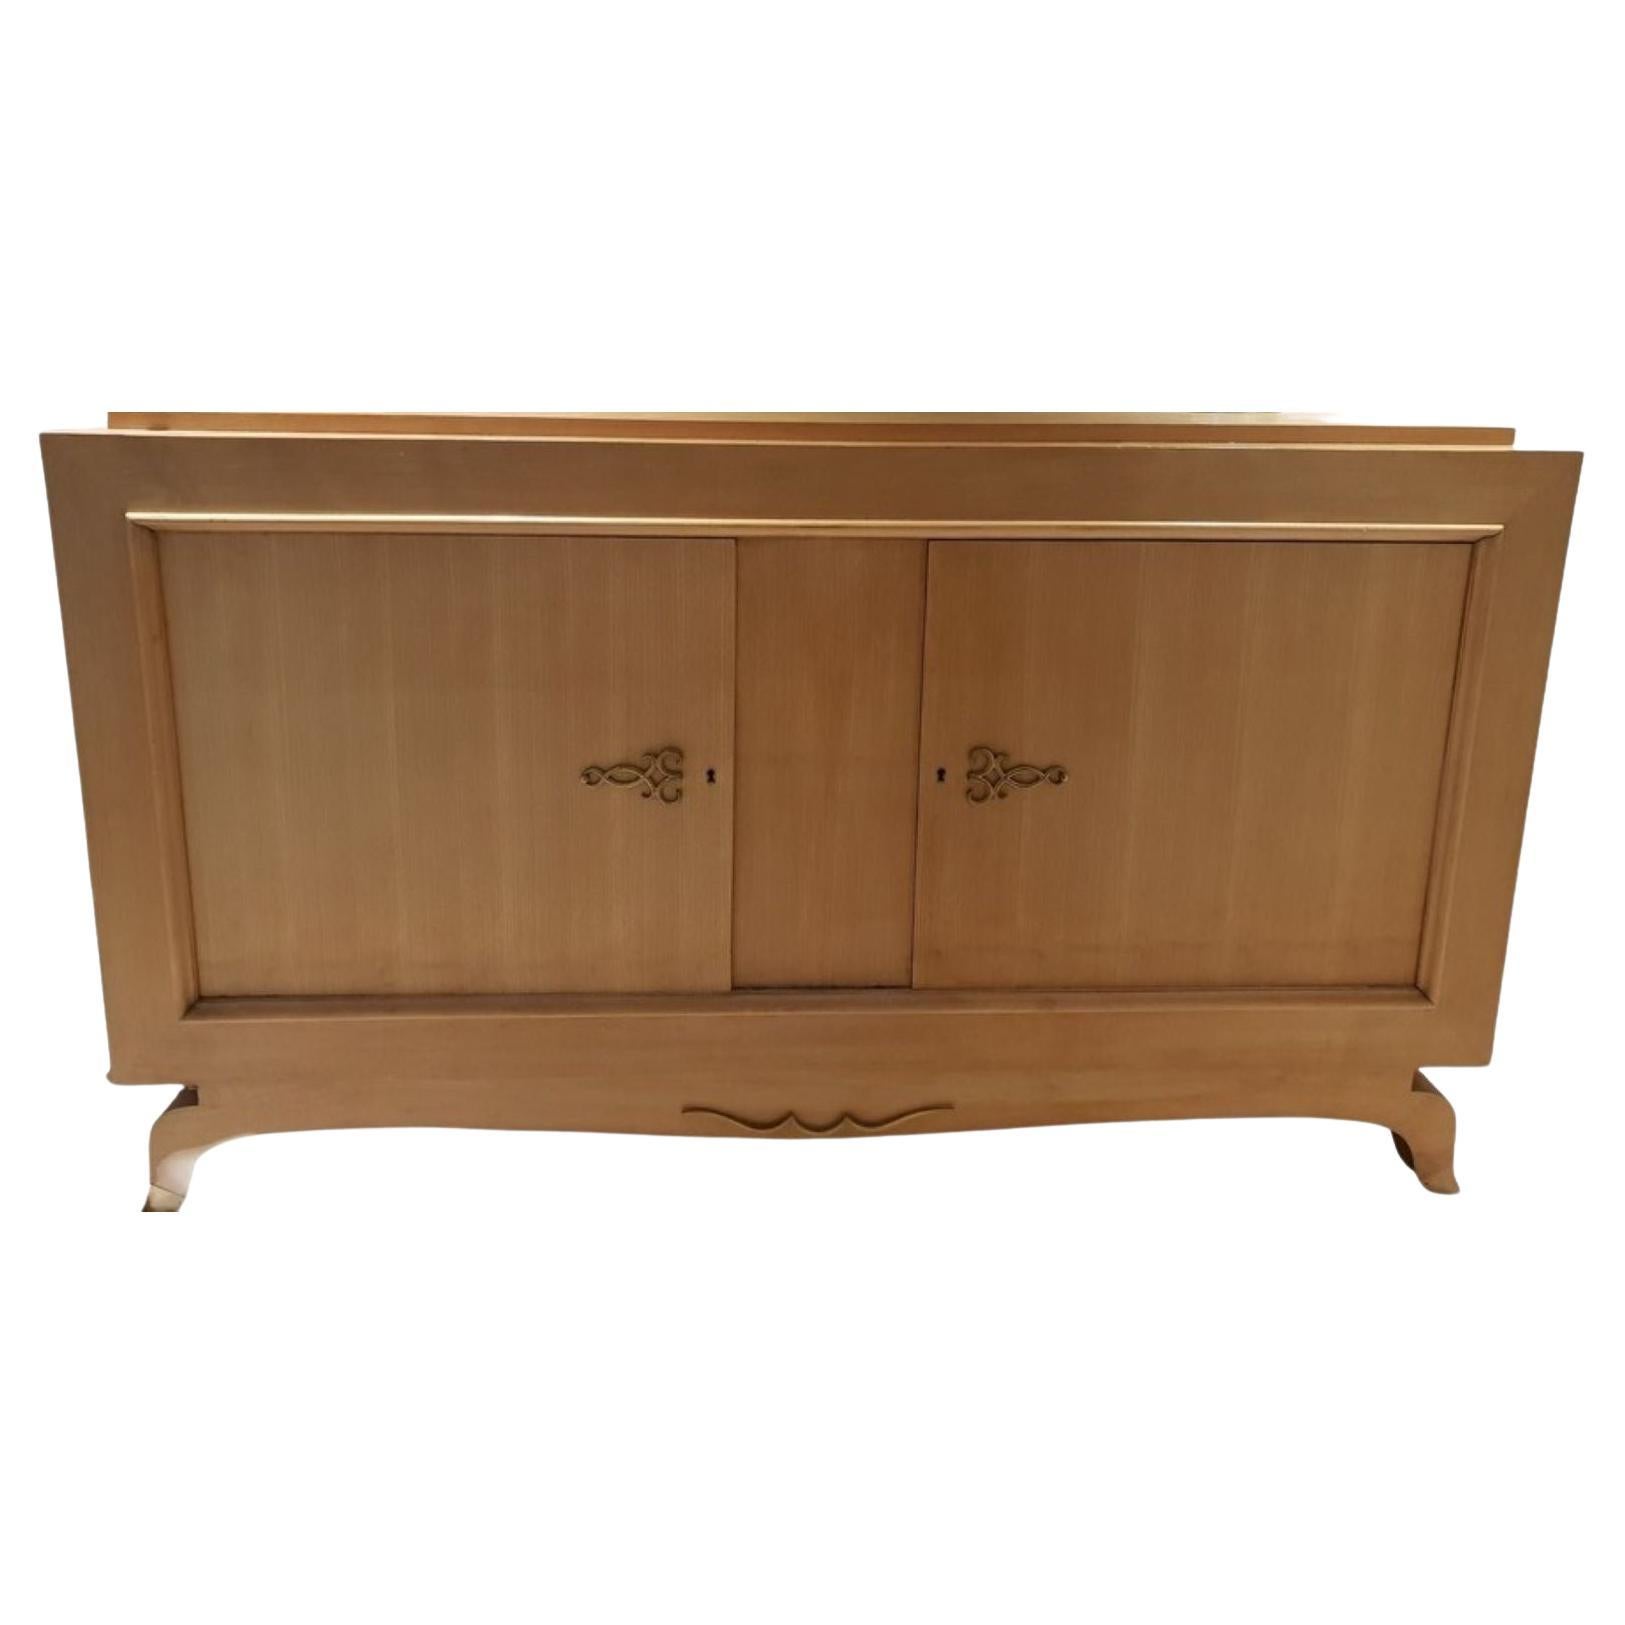 circa 1950s Sycamore Sideboard in the Style of Andre Arbus